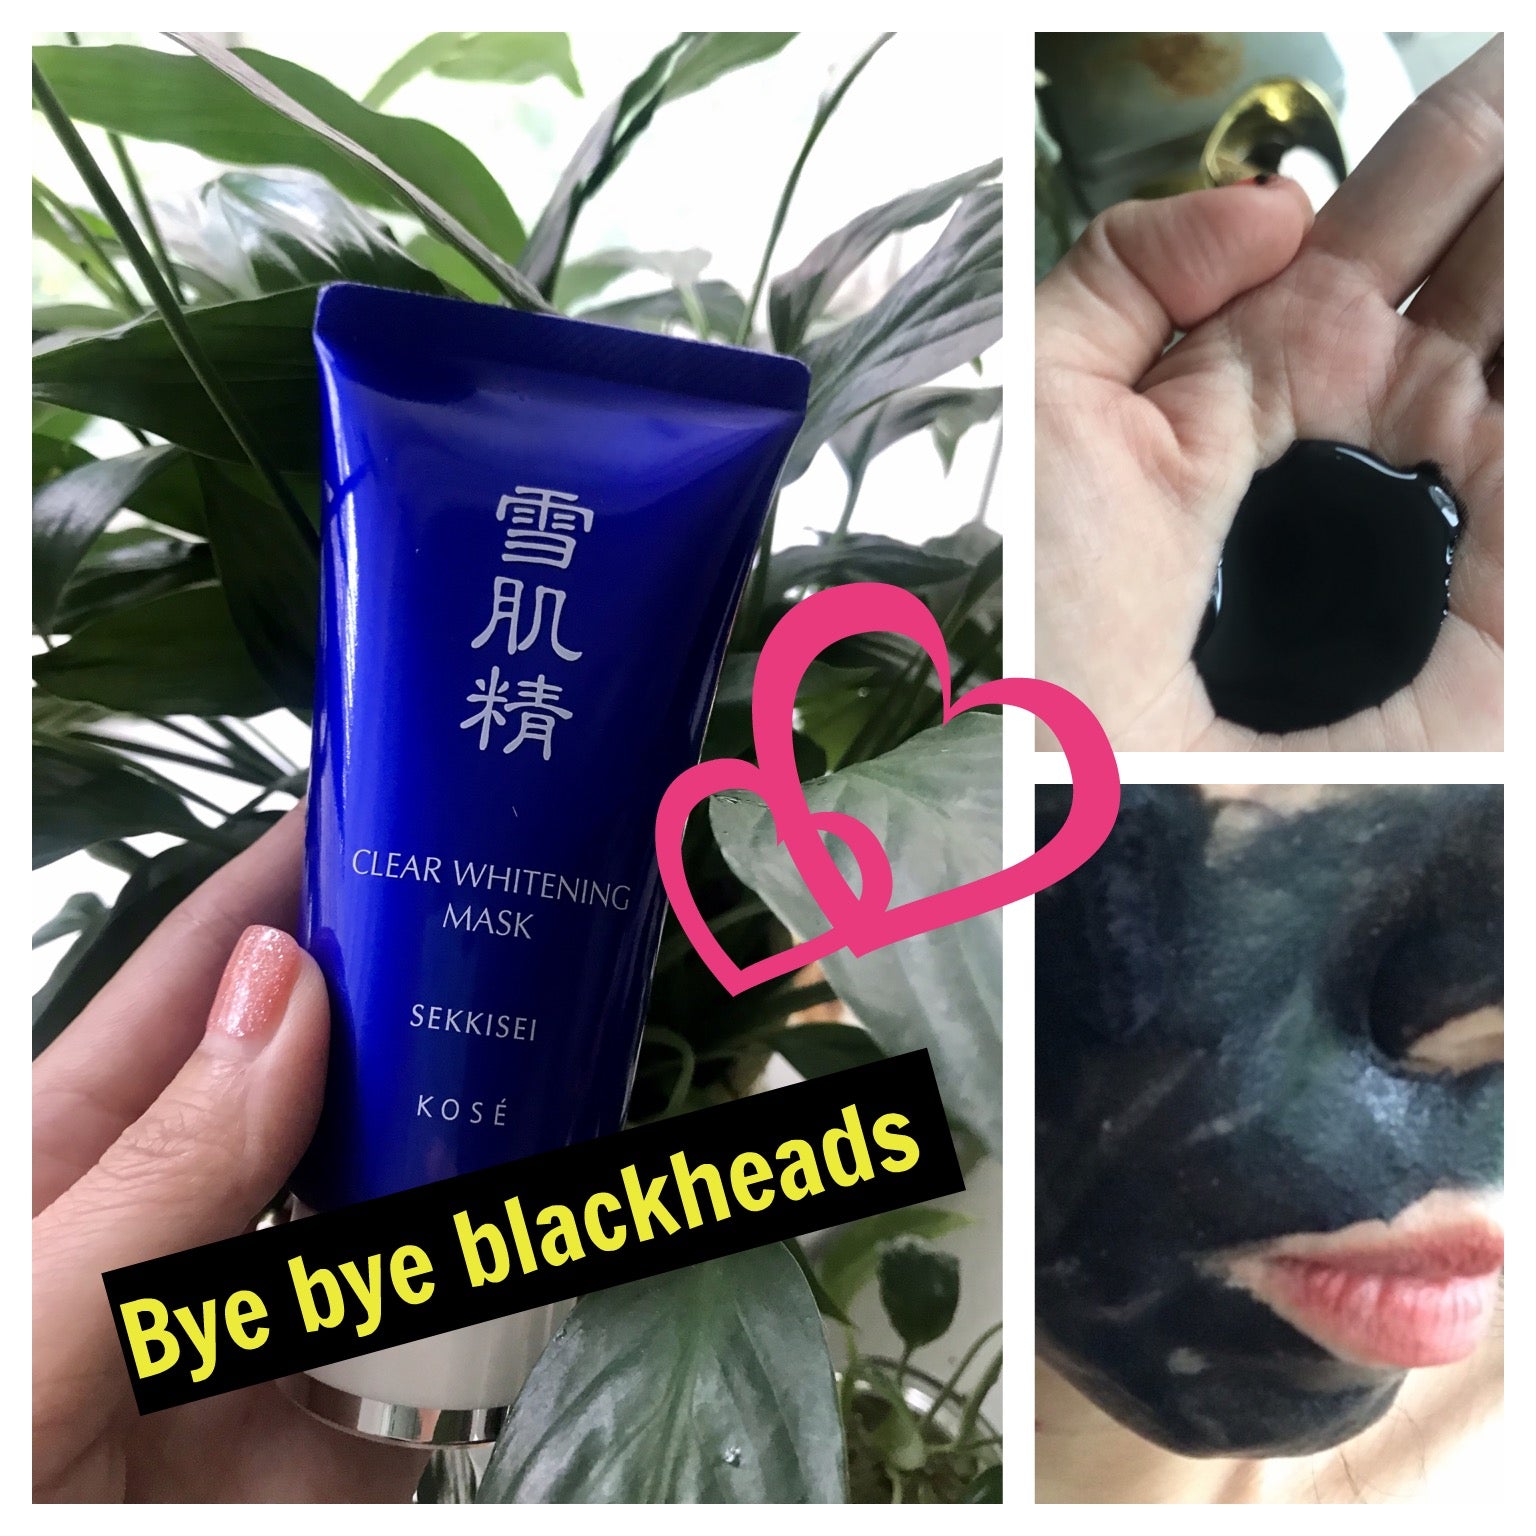 Kose Sekkisei Clear Whitening Mask. Remove blackheads, dead skin cells and refine large pores. Suitable for oily and combination skin. Made in Japan. Shipped from USA. 